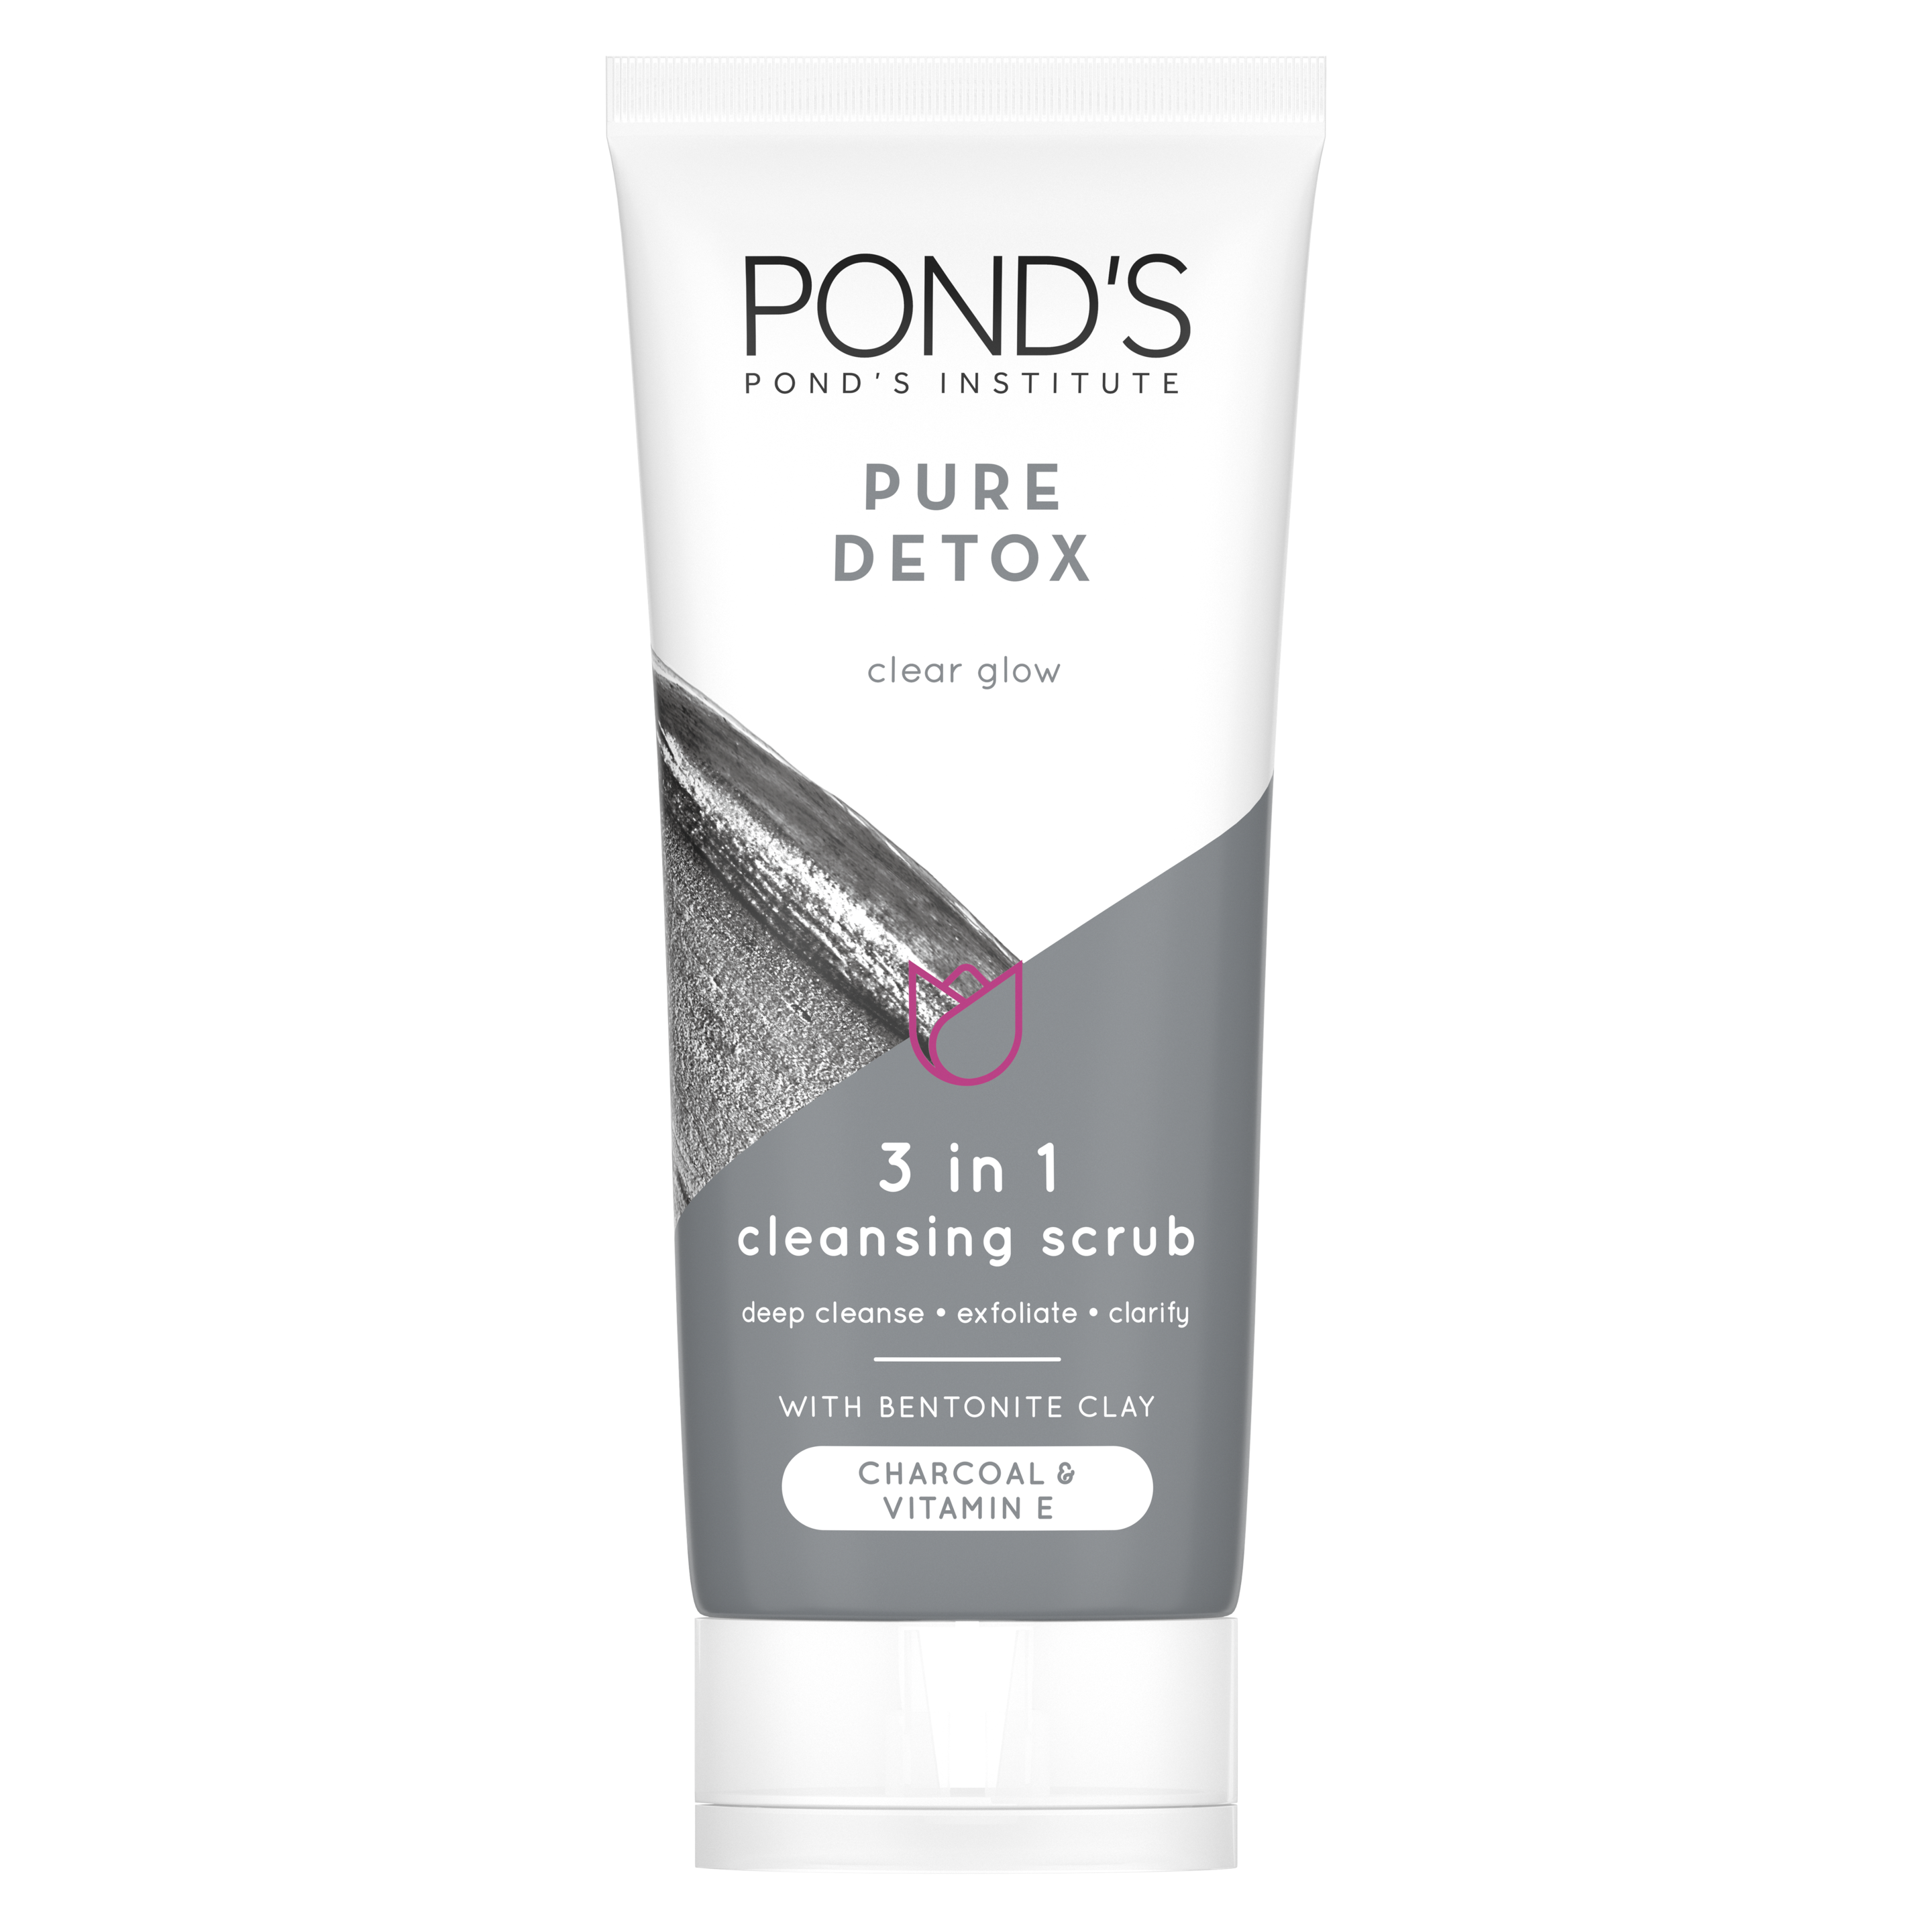 POND'S Pure Detox Mineral Clay Cleanser